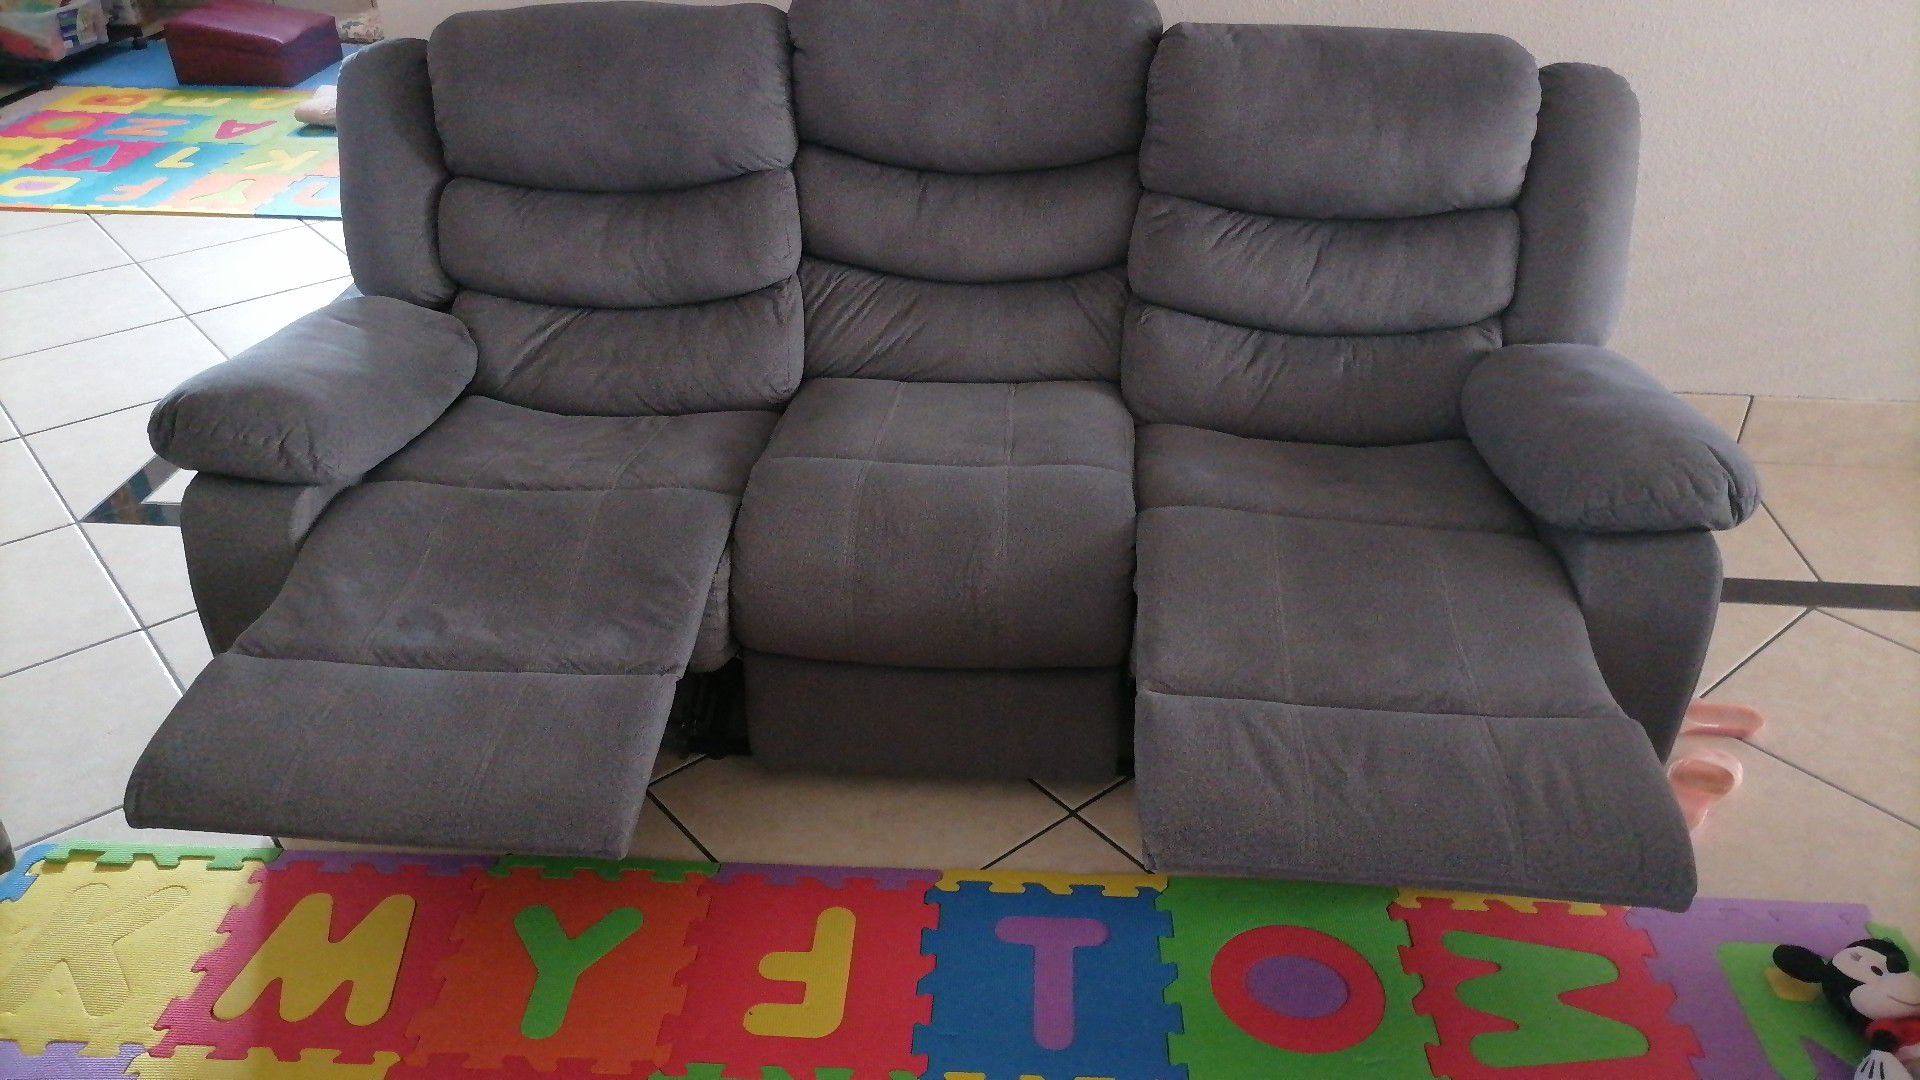 sofa 2pcs, 9months old. move out sale. separate price:3seat for$ 320, 2 seat$300, 3 pcs set $800